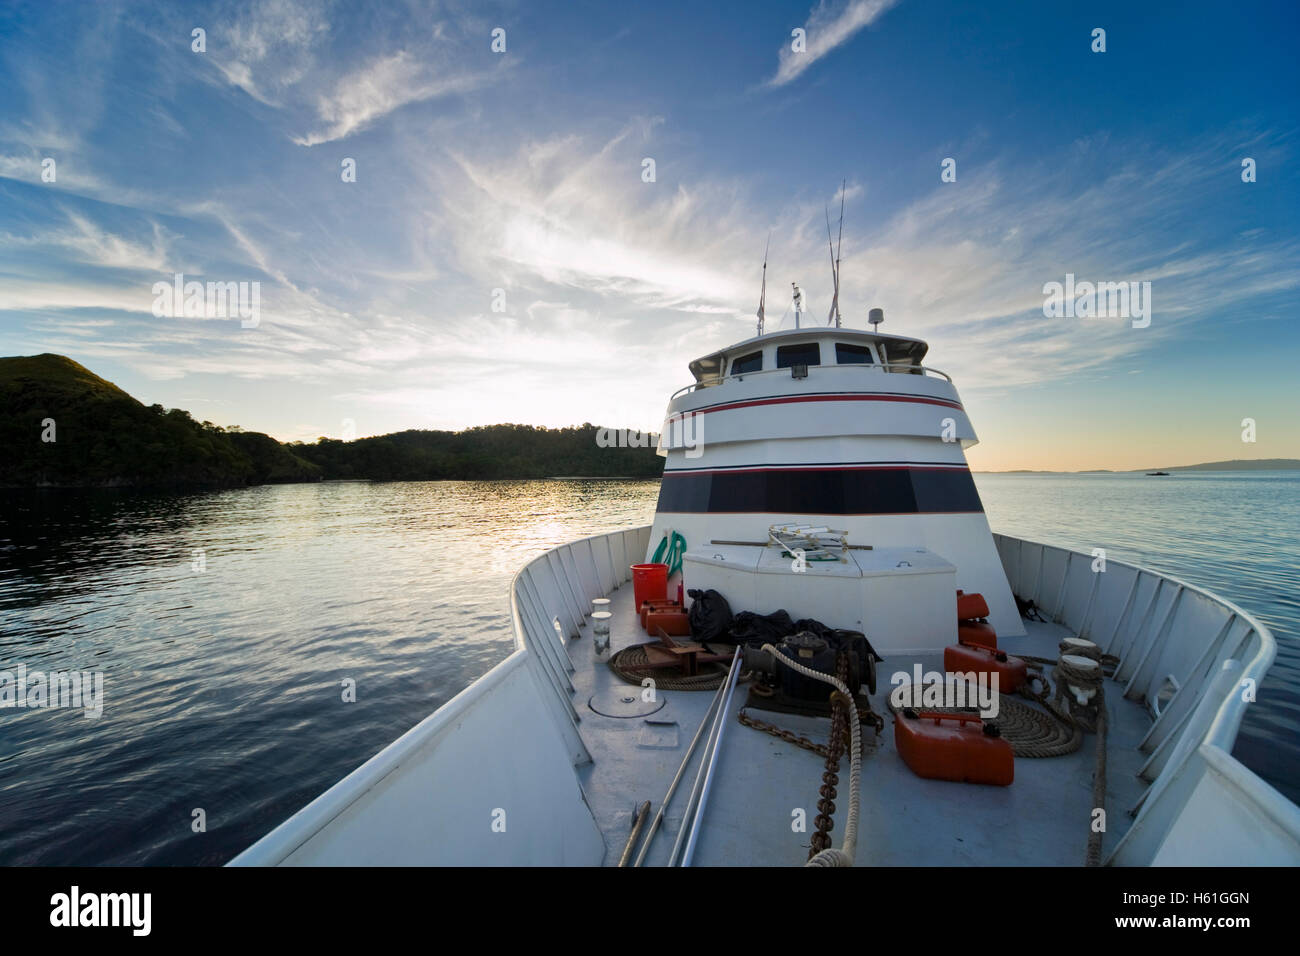 Bow of a boat in front of tropical landscape, Sulawesi, Indonesia, Southeast Asia Stock Photo